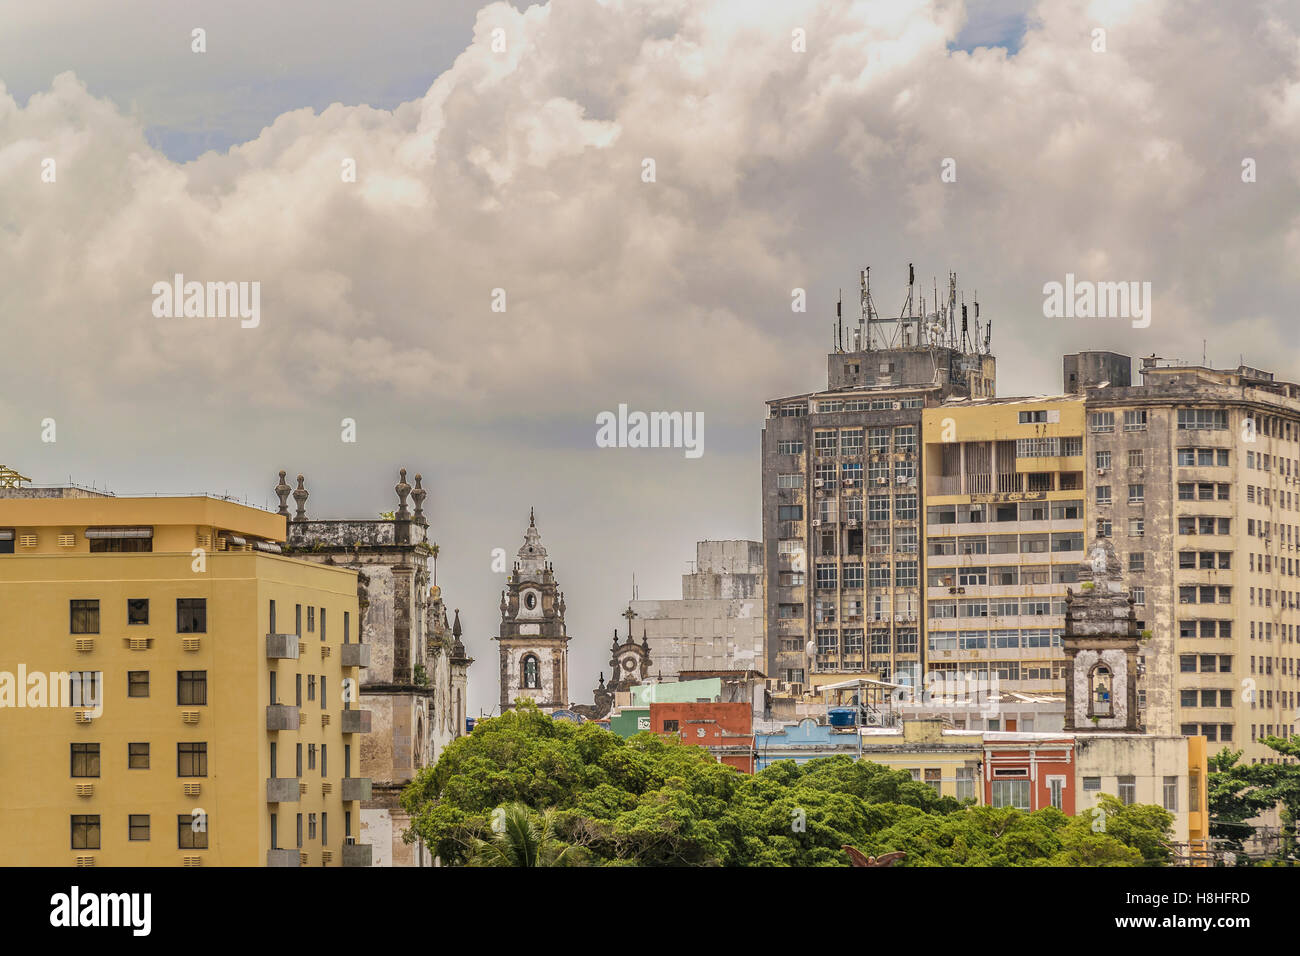 Cityscape view of eclectic style buildings at Recife city, Brazil Stock Photo